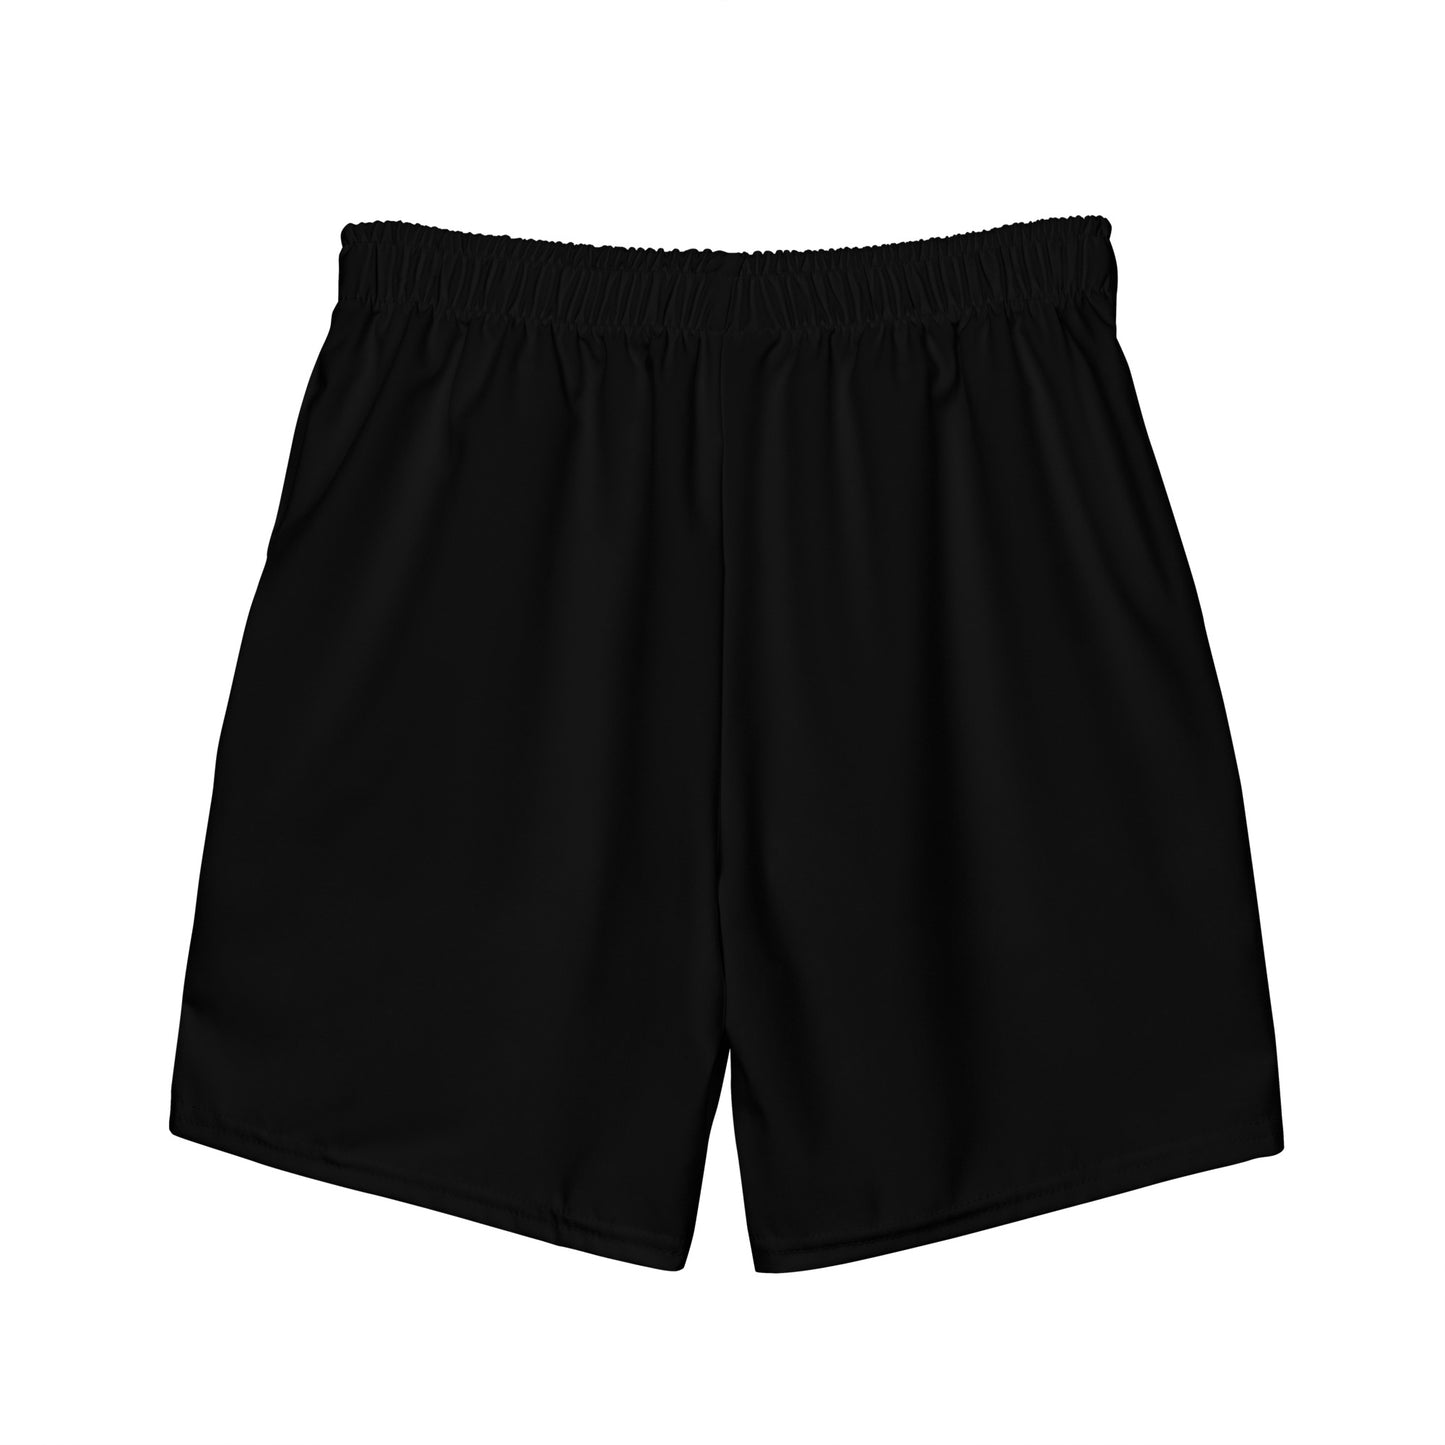 All-Over Print Recycled Swim Shorts: Black